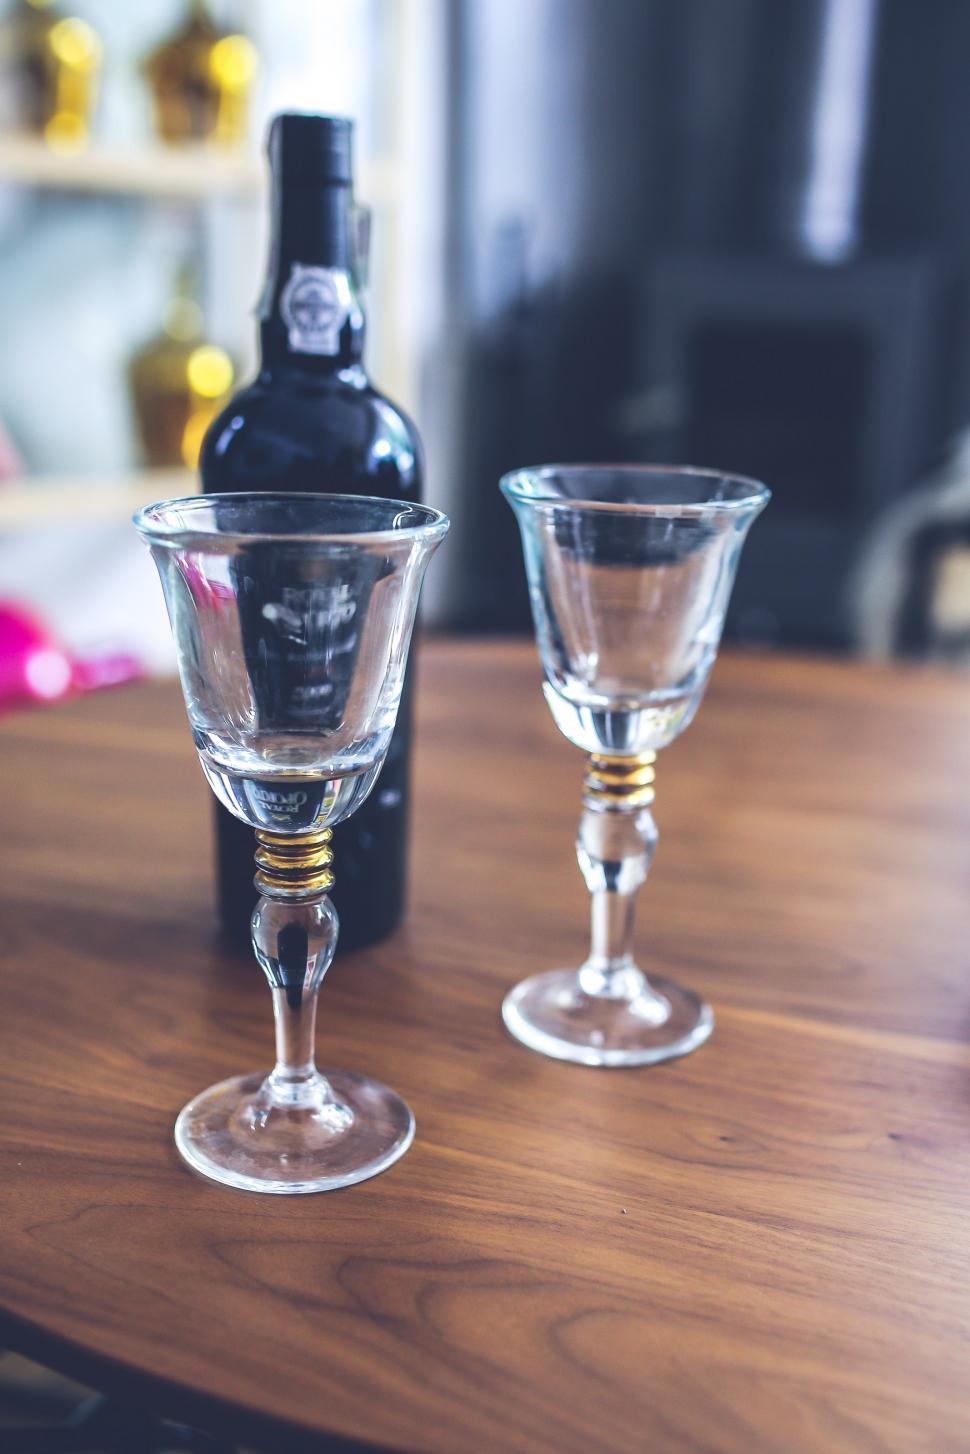 Free Image of Two Wine Glasses and Bottle on Table 